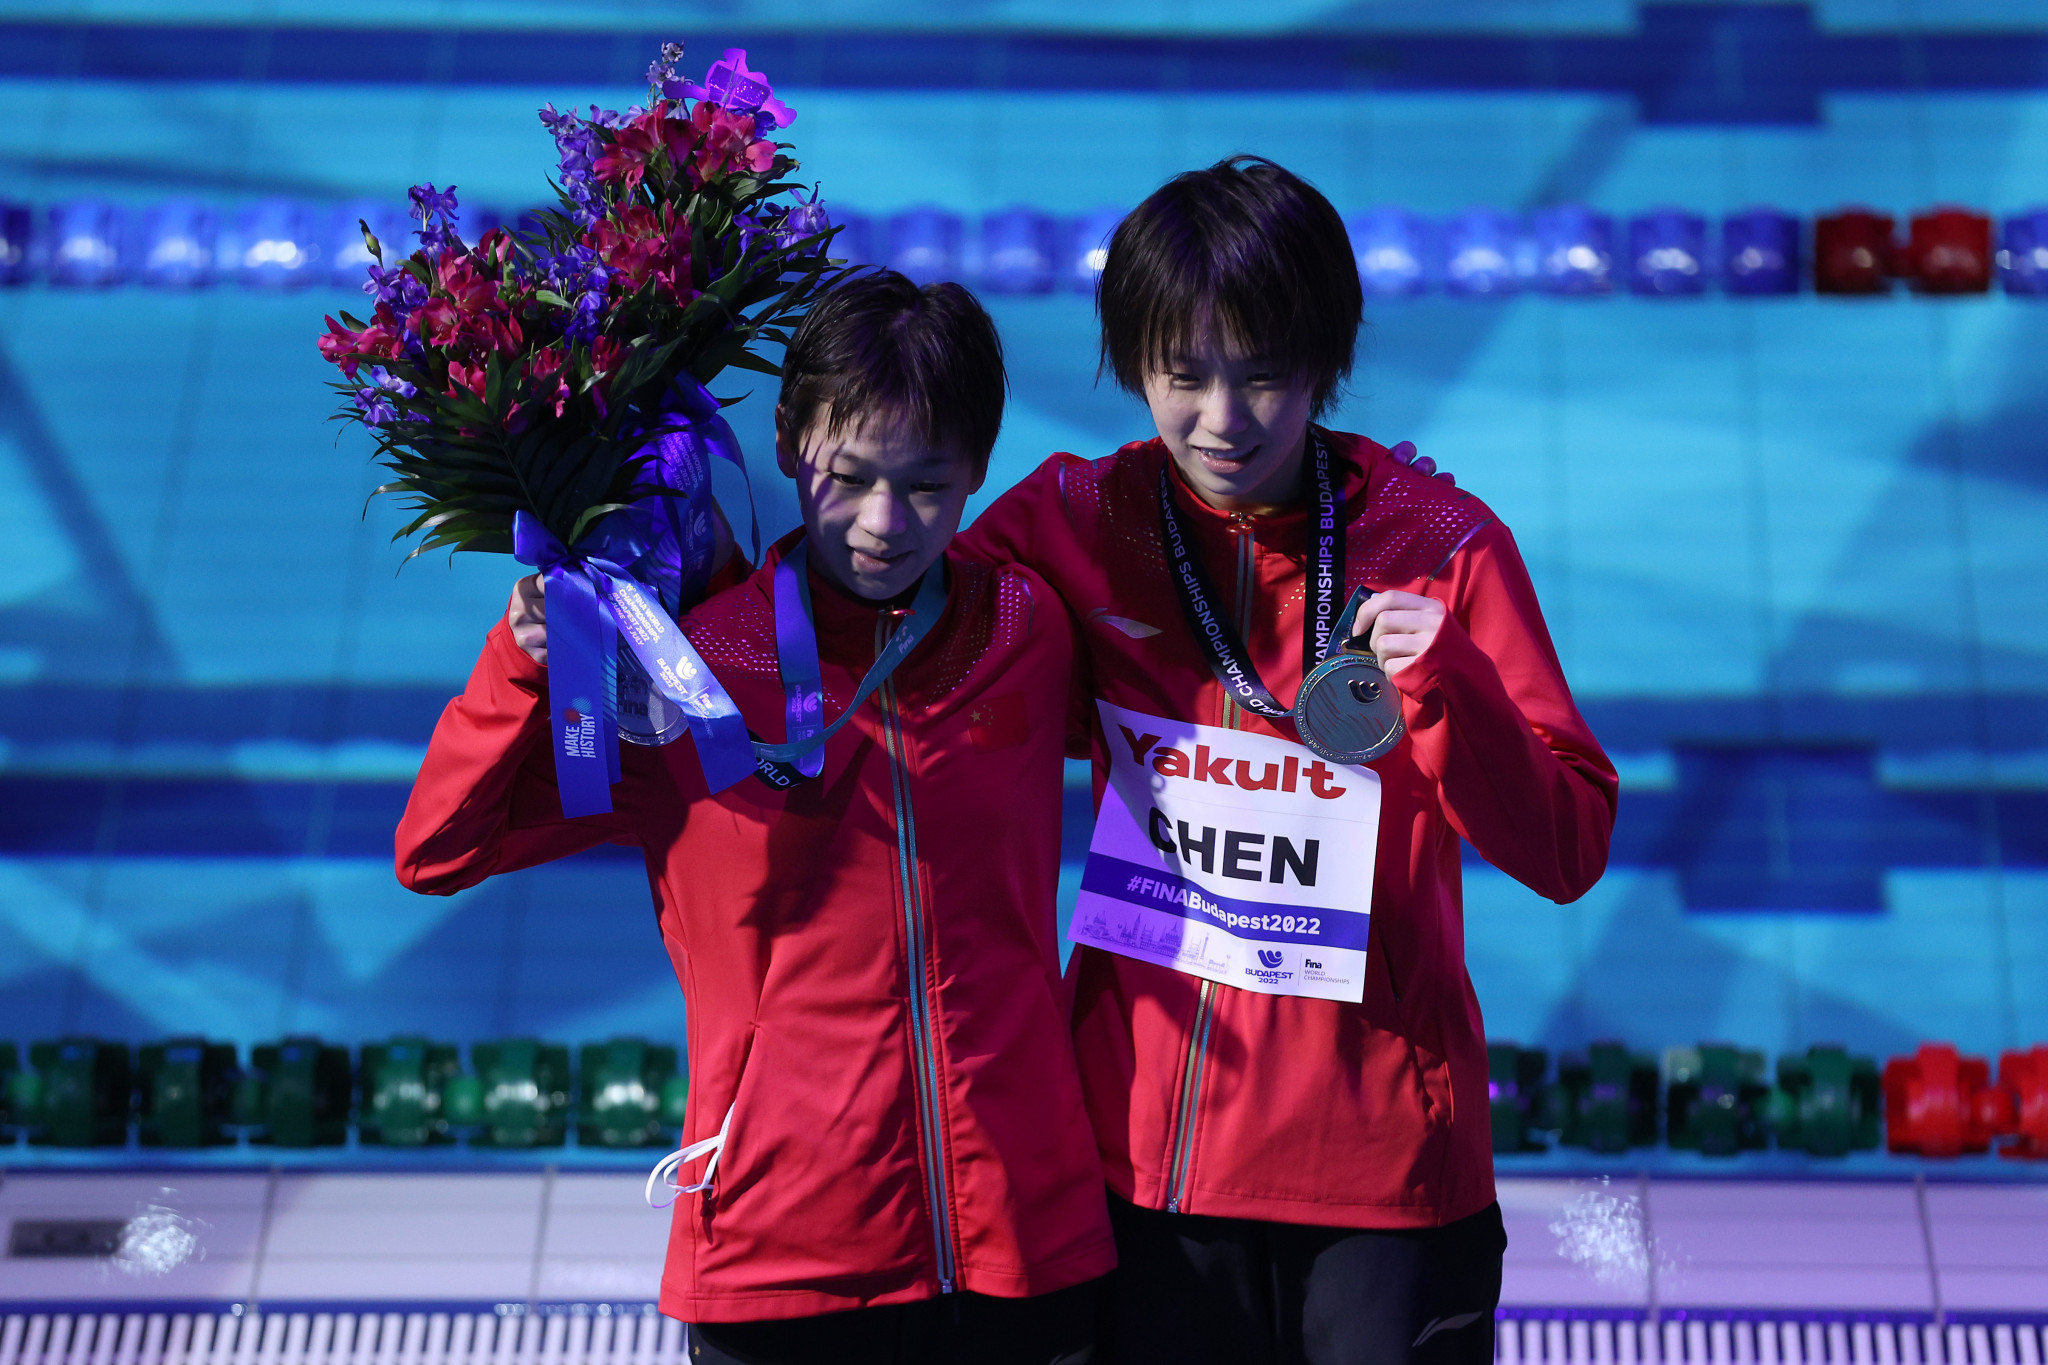 China's Chen Yuxi, right, claimed 0.30 points more than compatriot Quan Hongchan, right, to take women's 10m platform diving gold in Budapest ©Getty Images